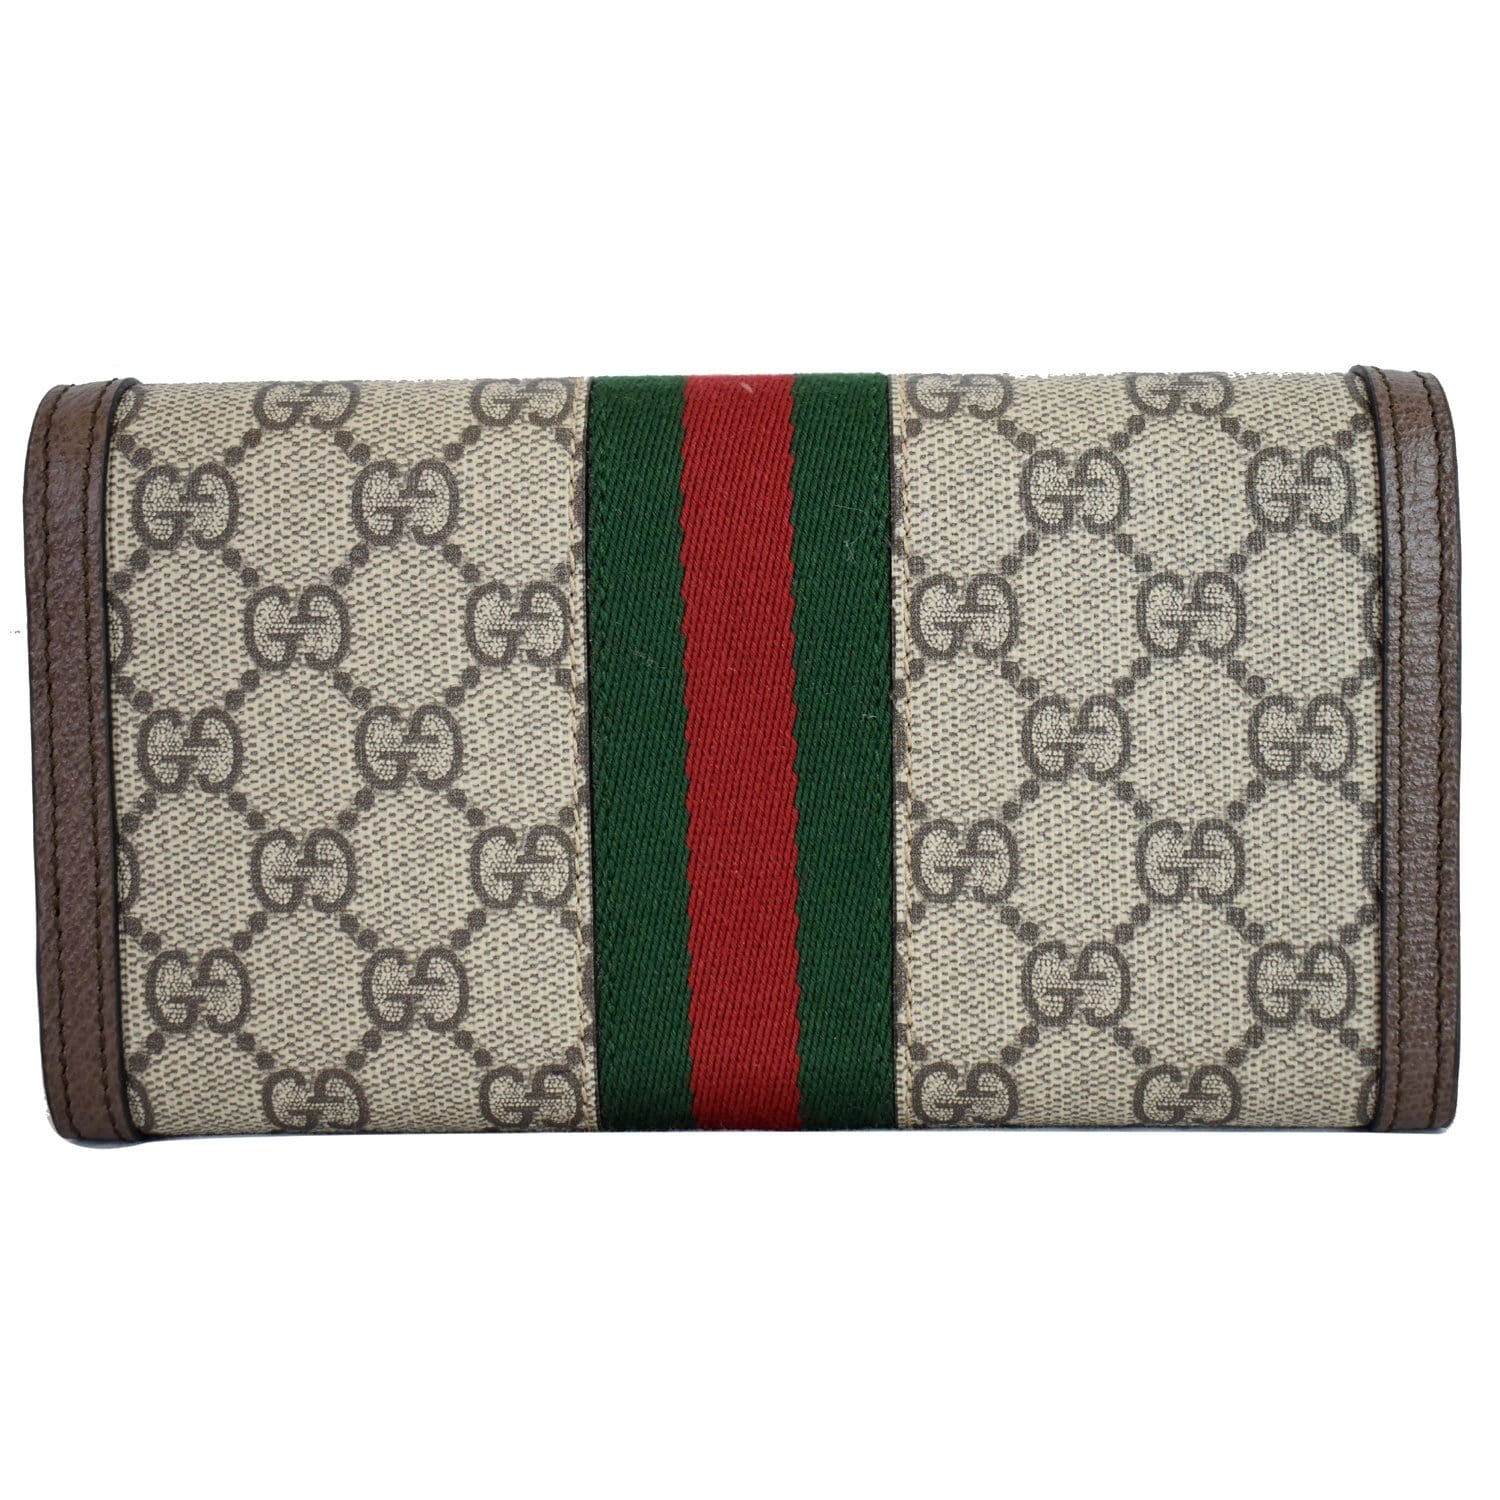 GUCCI Ophidia GG Continental Supreme Canvas Wallet Beige 523153 - 15%